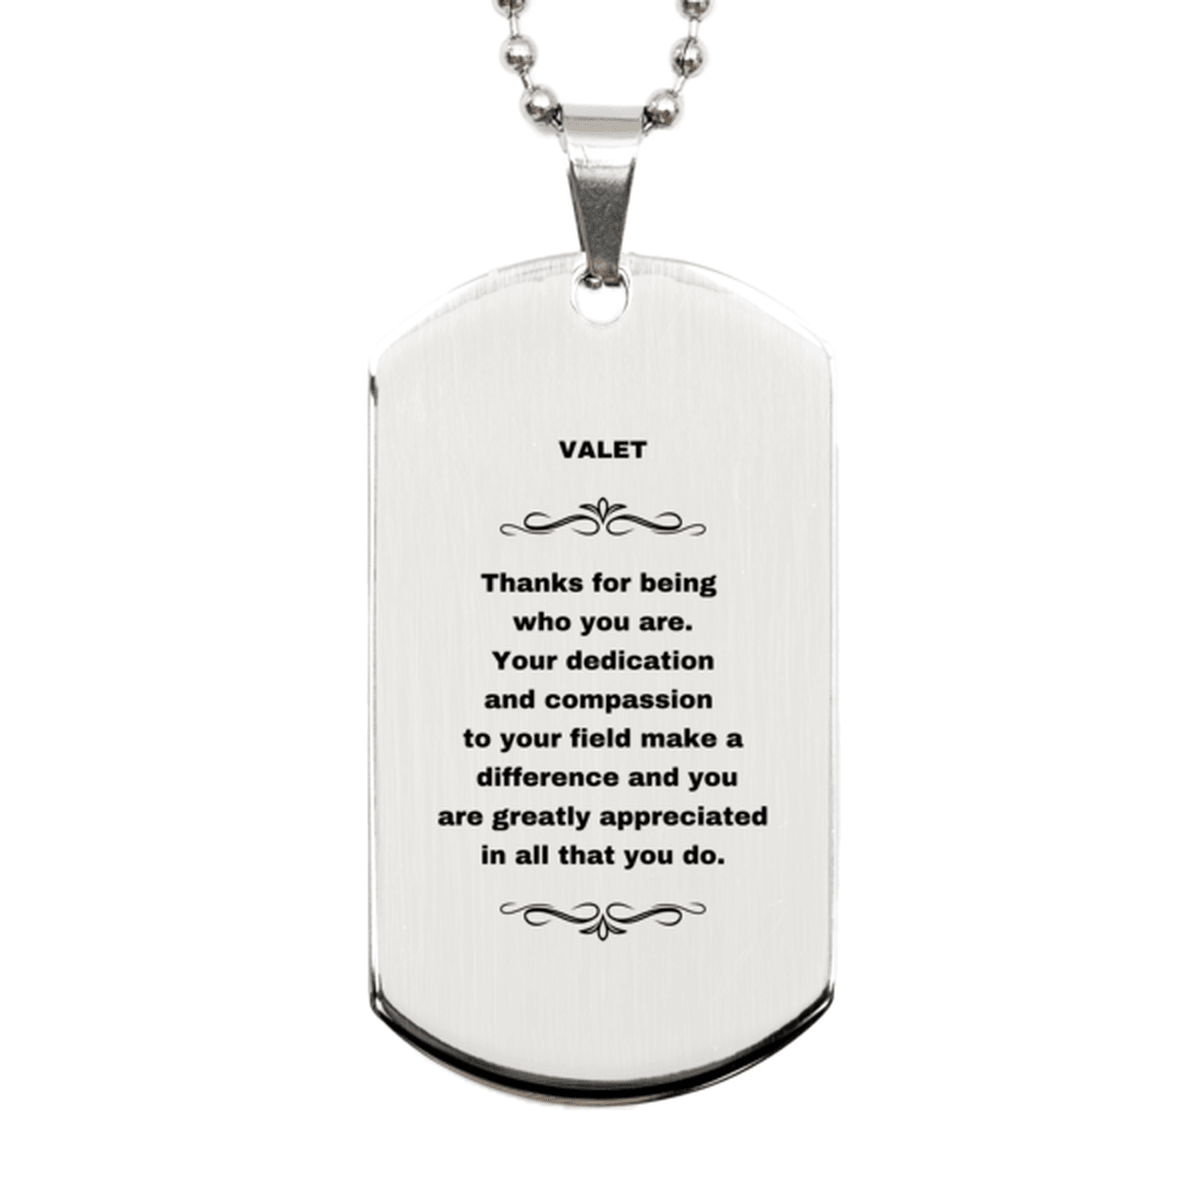 Valet Silver Engraved Dog Tag Necklace - Thanks for being who you are - Birthday Christmas Jewelry Gifts Coworkers Colleague Boss - Mallard Moon Gift Shop